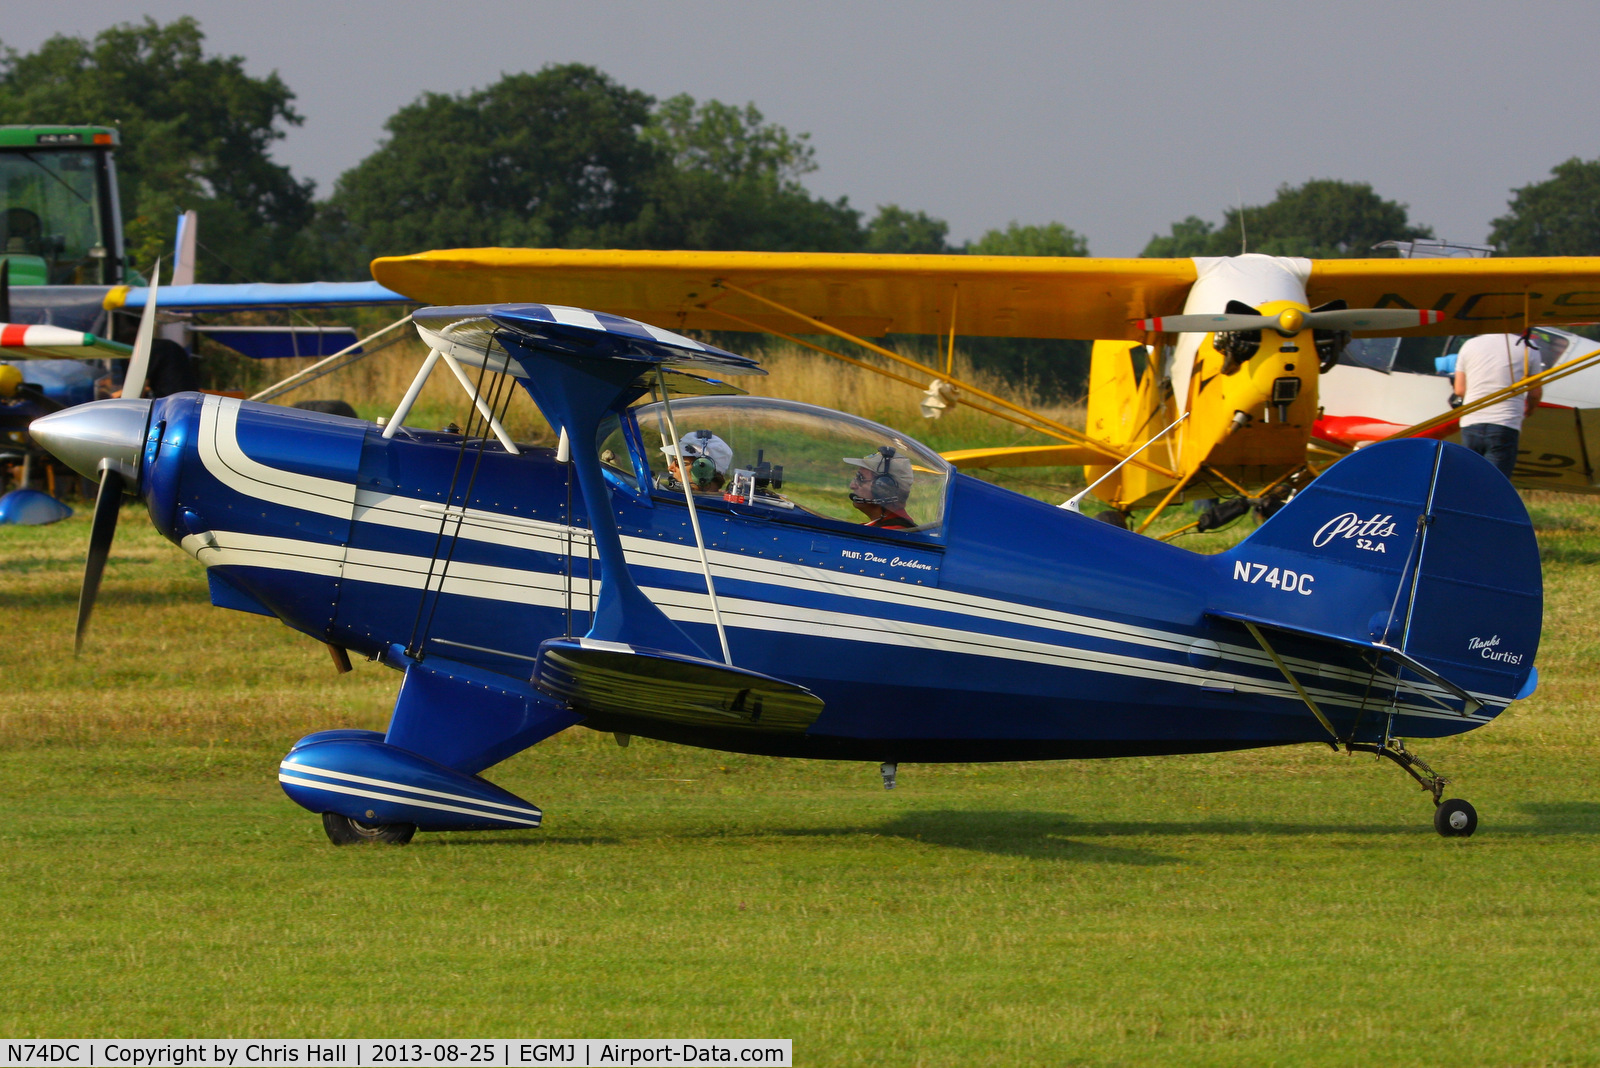 N74DC, 1980 Aerotek Pitts S-2A Special C/N 2228, at the Little Gransden Air & Vintage Vehicle Show